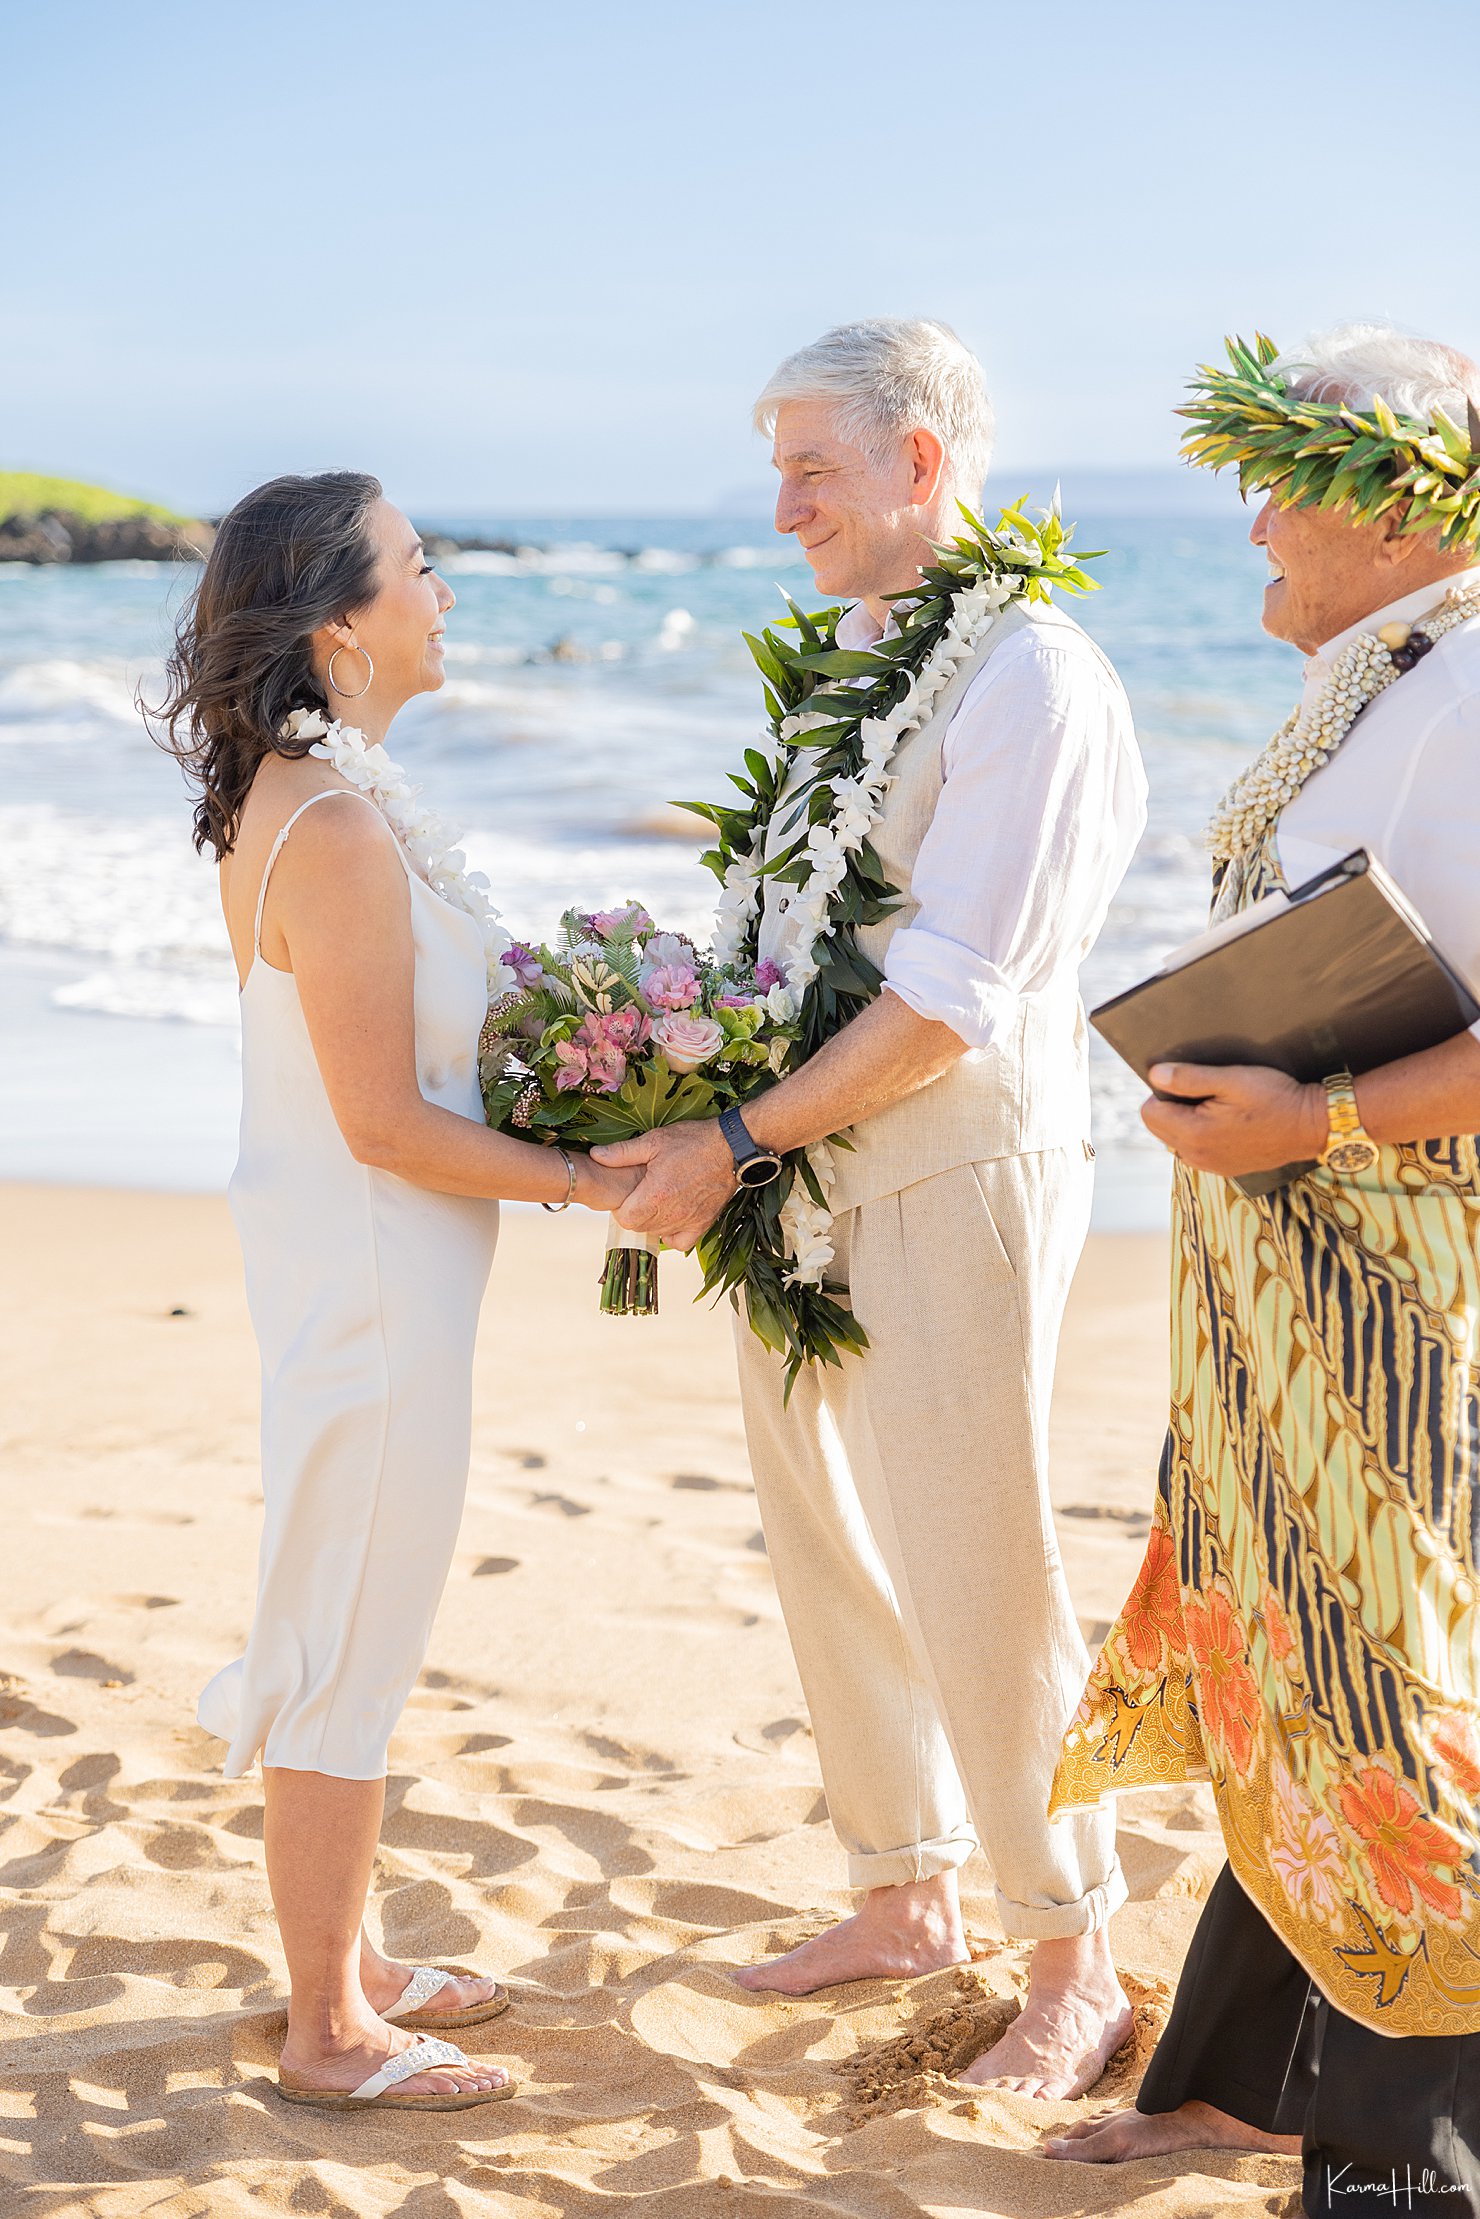 Colleen & Donald get married in Maui